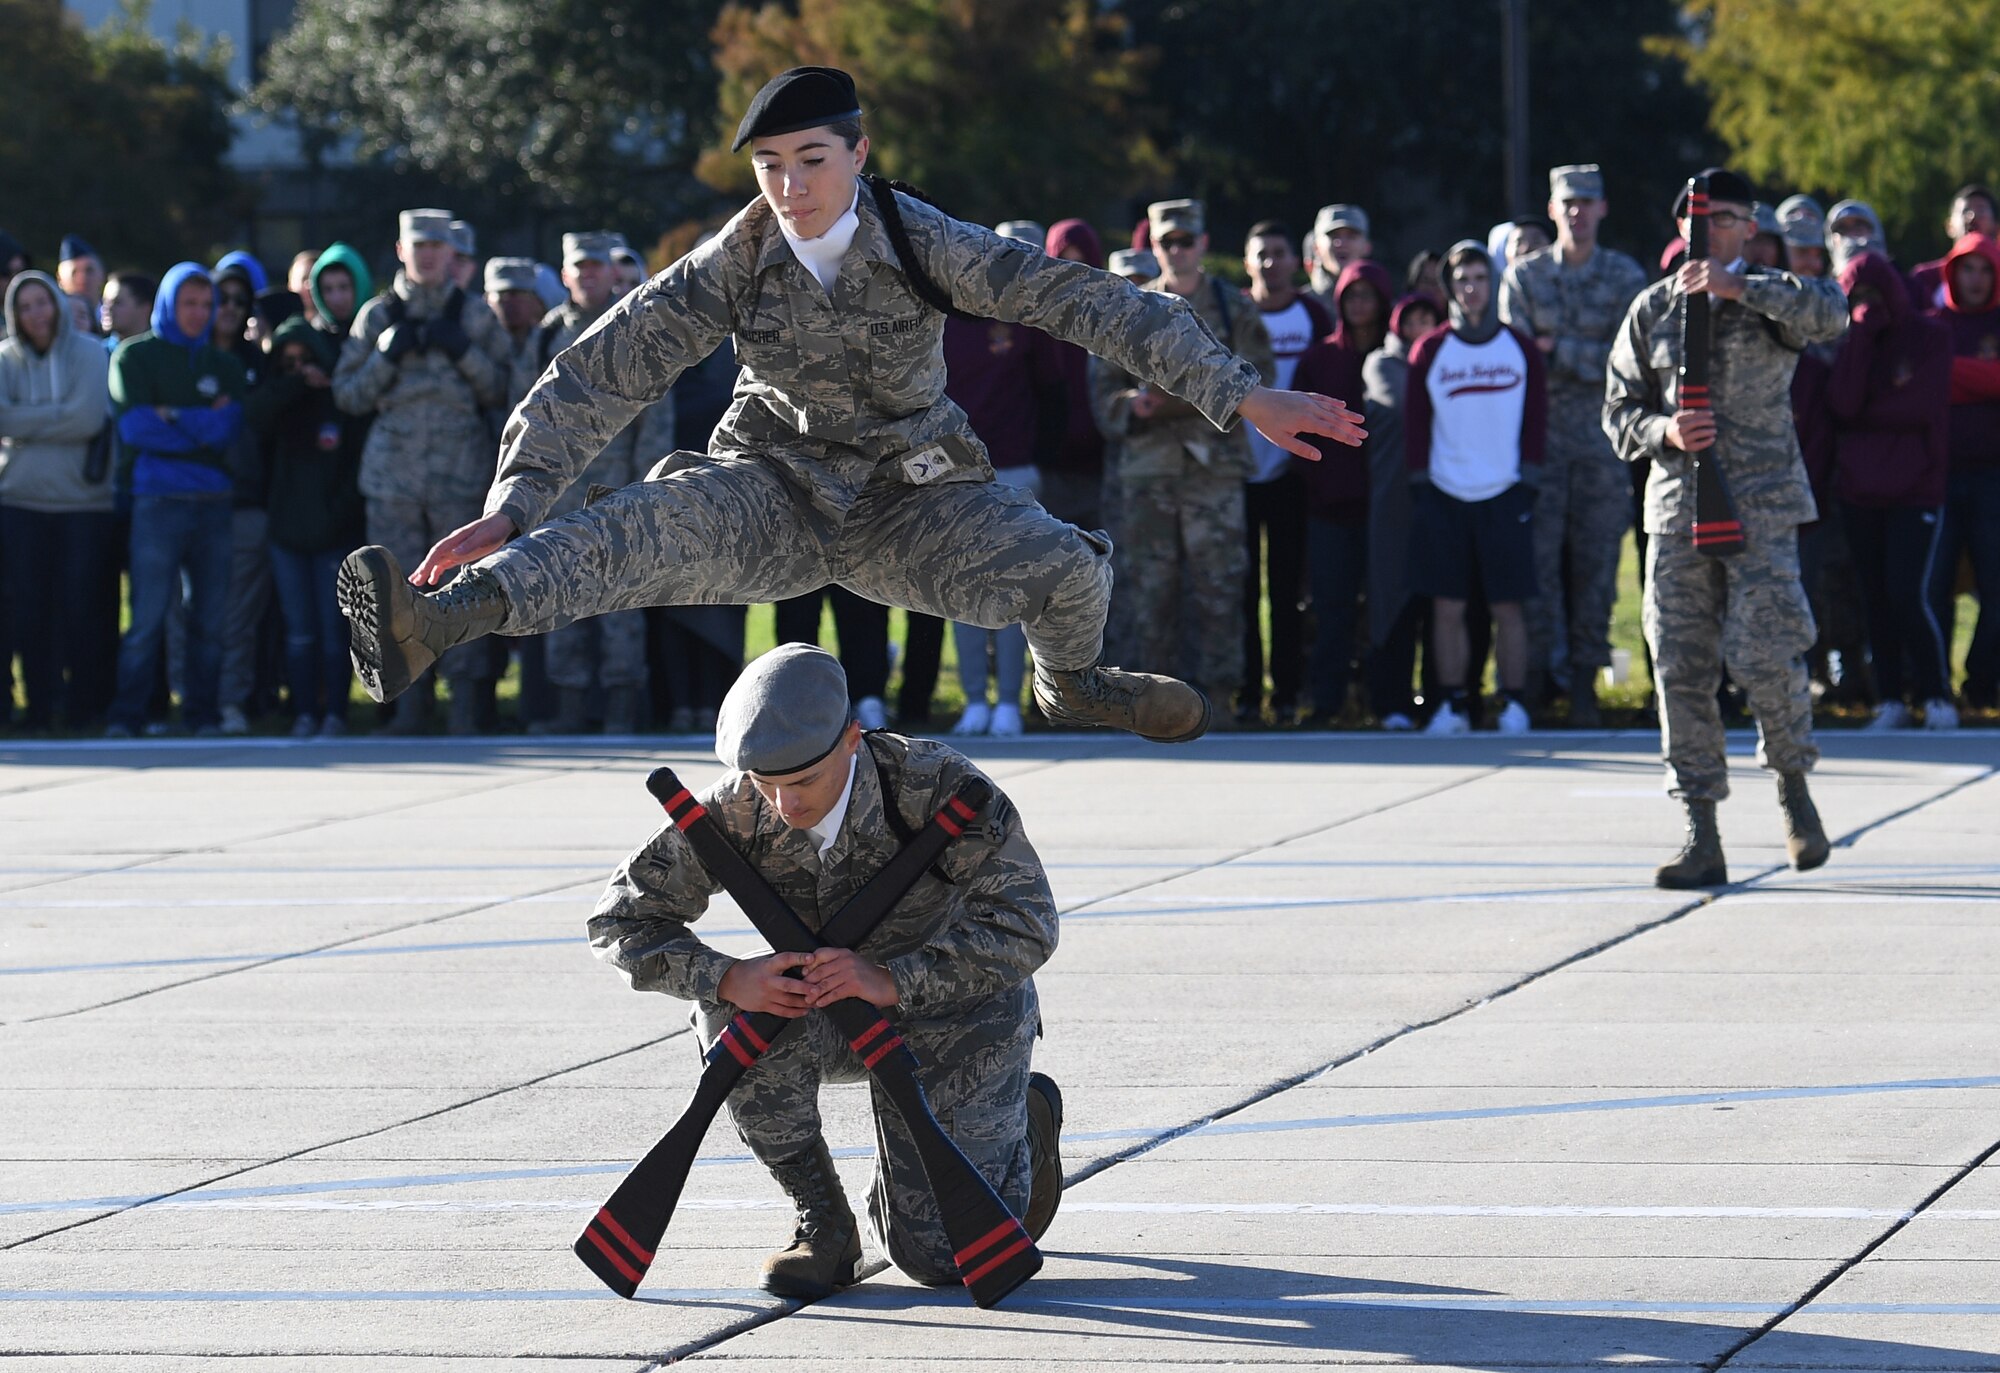 U.S. Air Force Airman Danielle Gaucher and Airman 1st Class Ethan Muncy, 335th Training Squadron freestyle drill team members, perform during the 81st Training Group drill down on the Levitow Training Support Facility drill pad at Keesler Air Force Base, Mississippi, Nov. 1, 2019. Airmen from the 81st TRG competed in a quarterly open ranks inspection, regulation drill routine and freestyle drill routine. Keesler trains more than 30,000 students each year. While in training, Airmen are given the opportunity to volunteer to learn and execute drill down routines. (U.S. Air Force photo by Kemberly Groue)